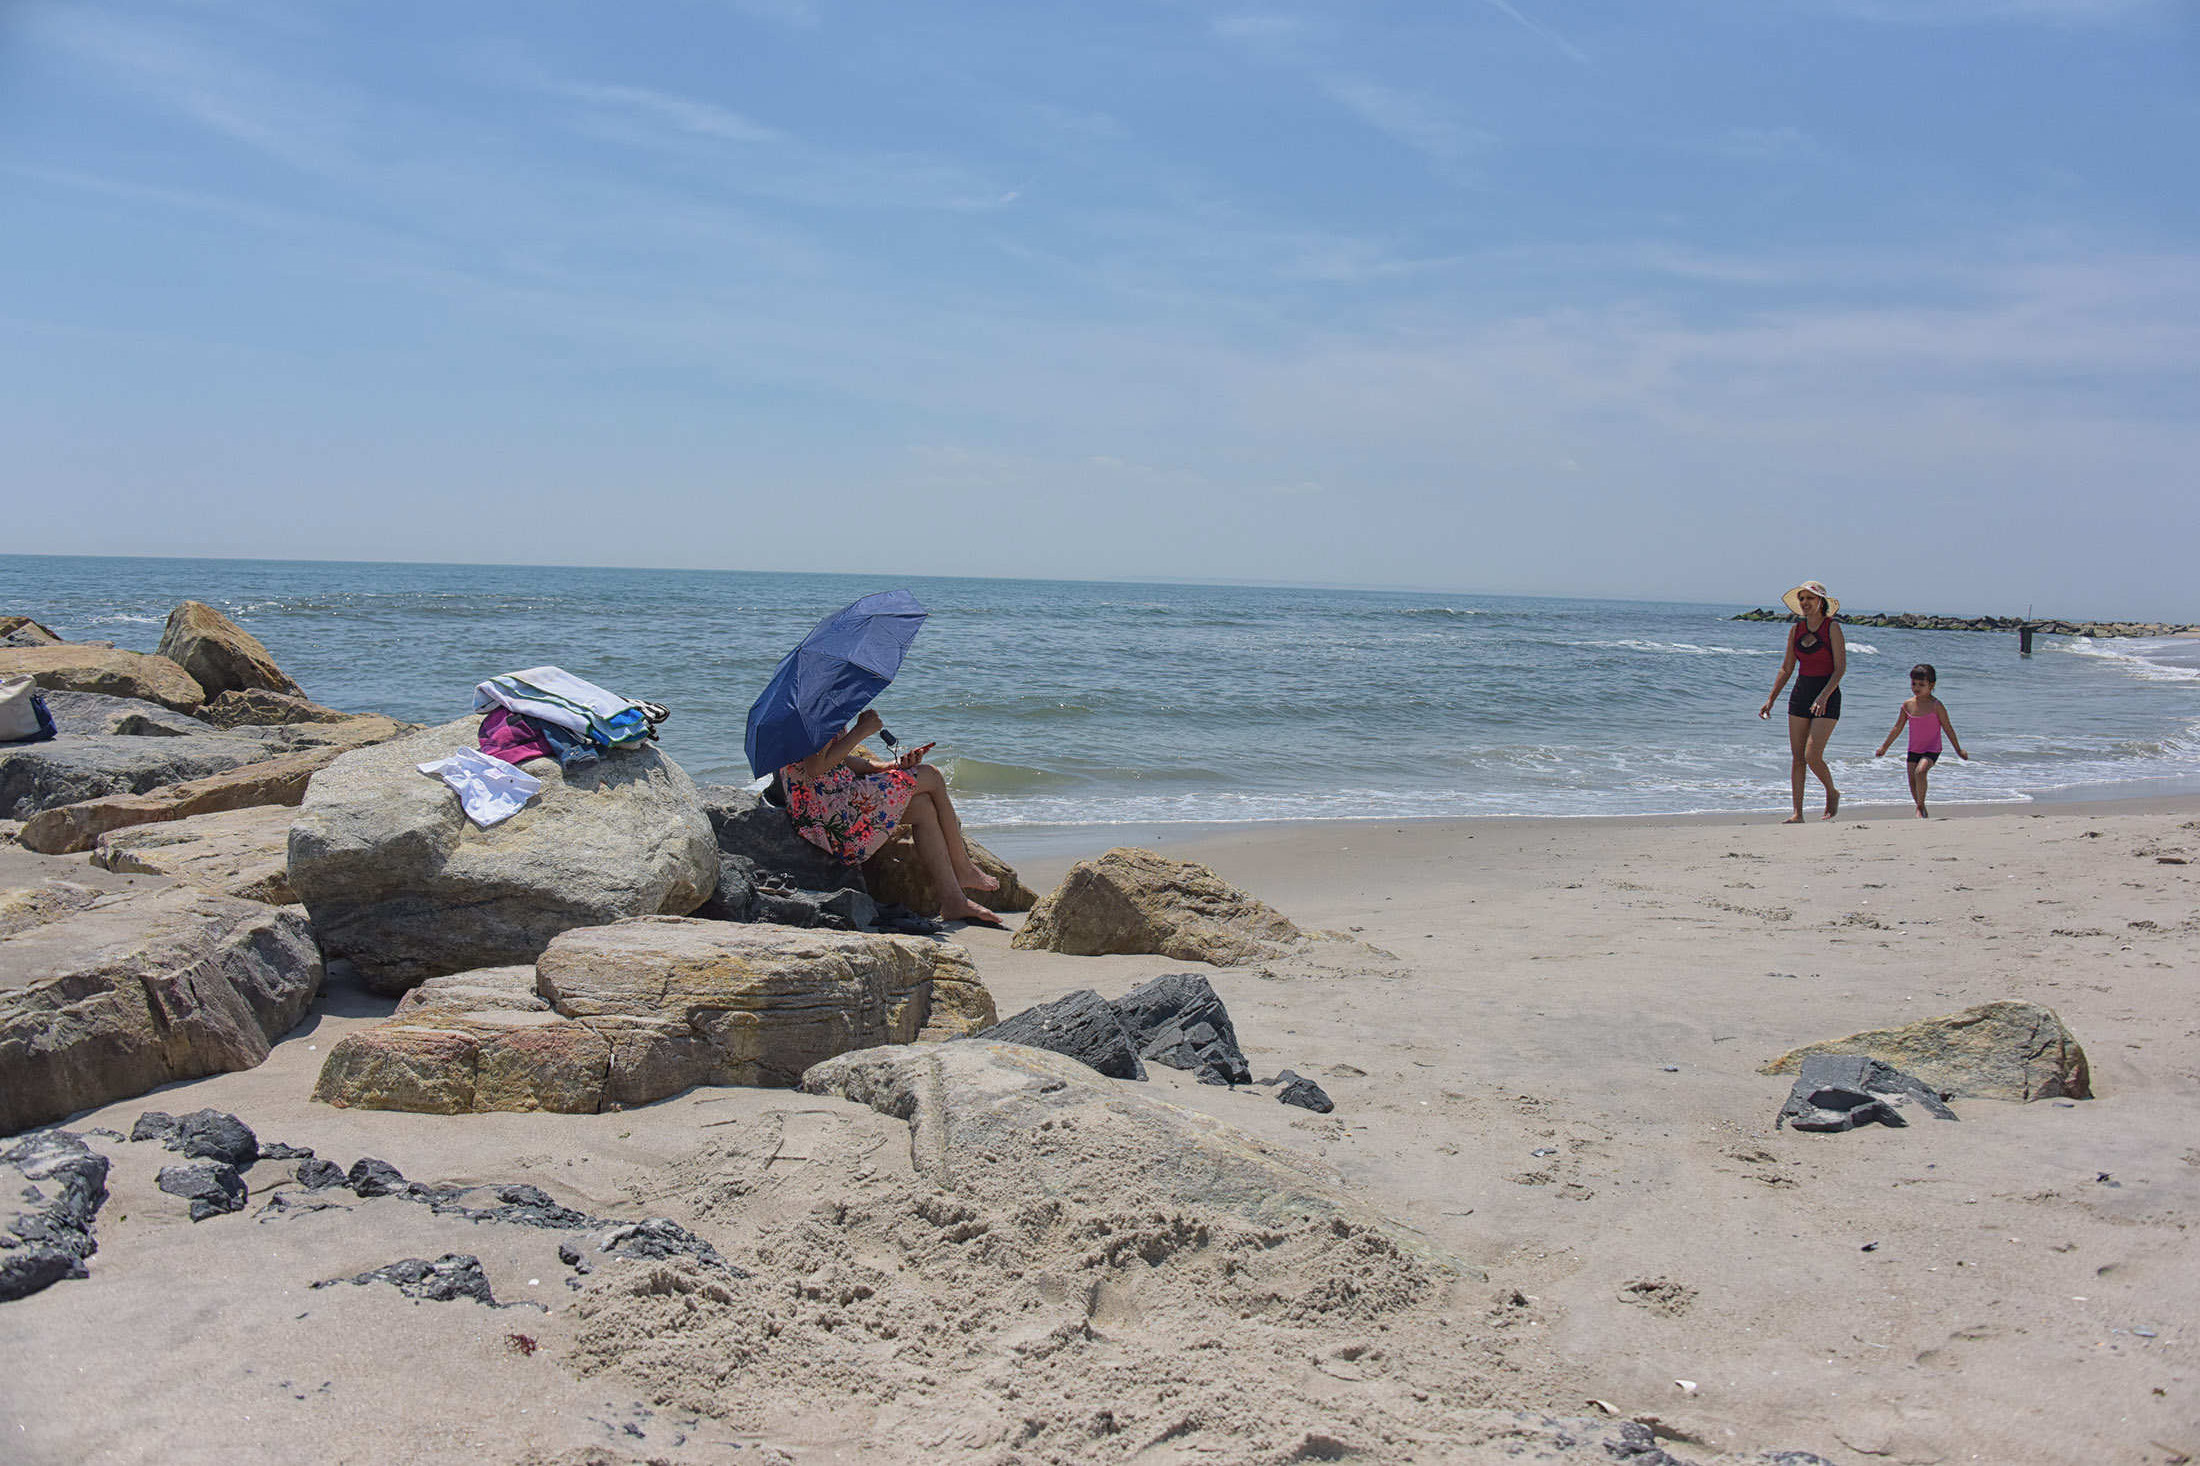 Part of Rockaway Beach will close because it's too rocky